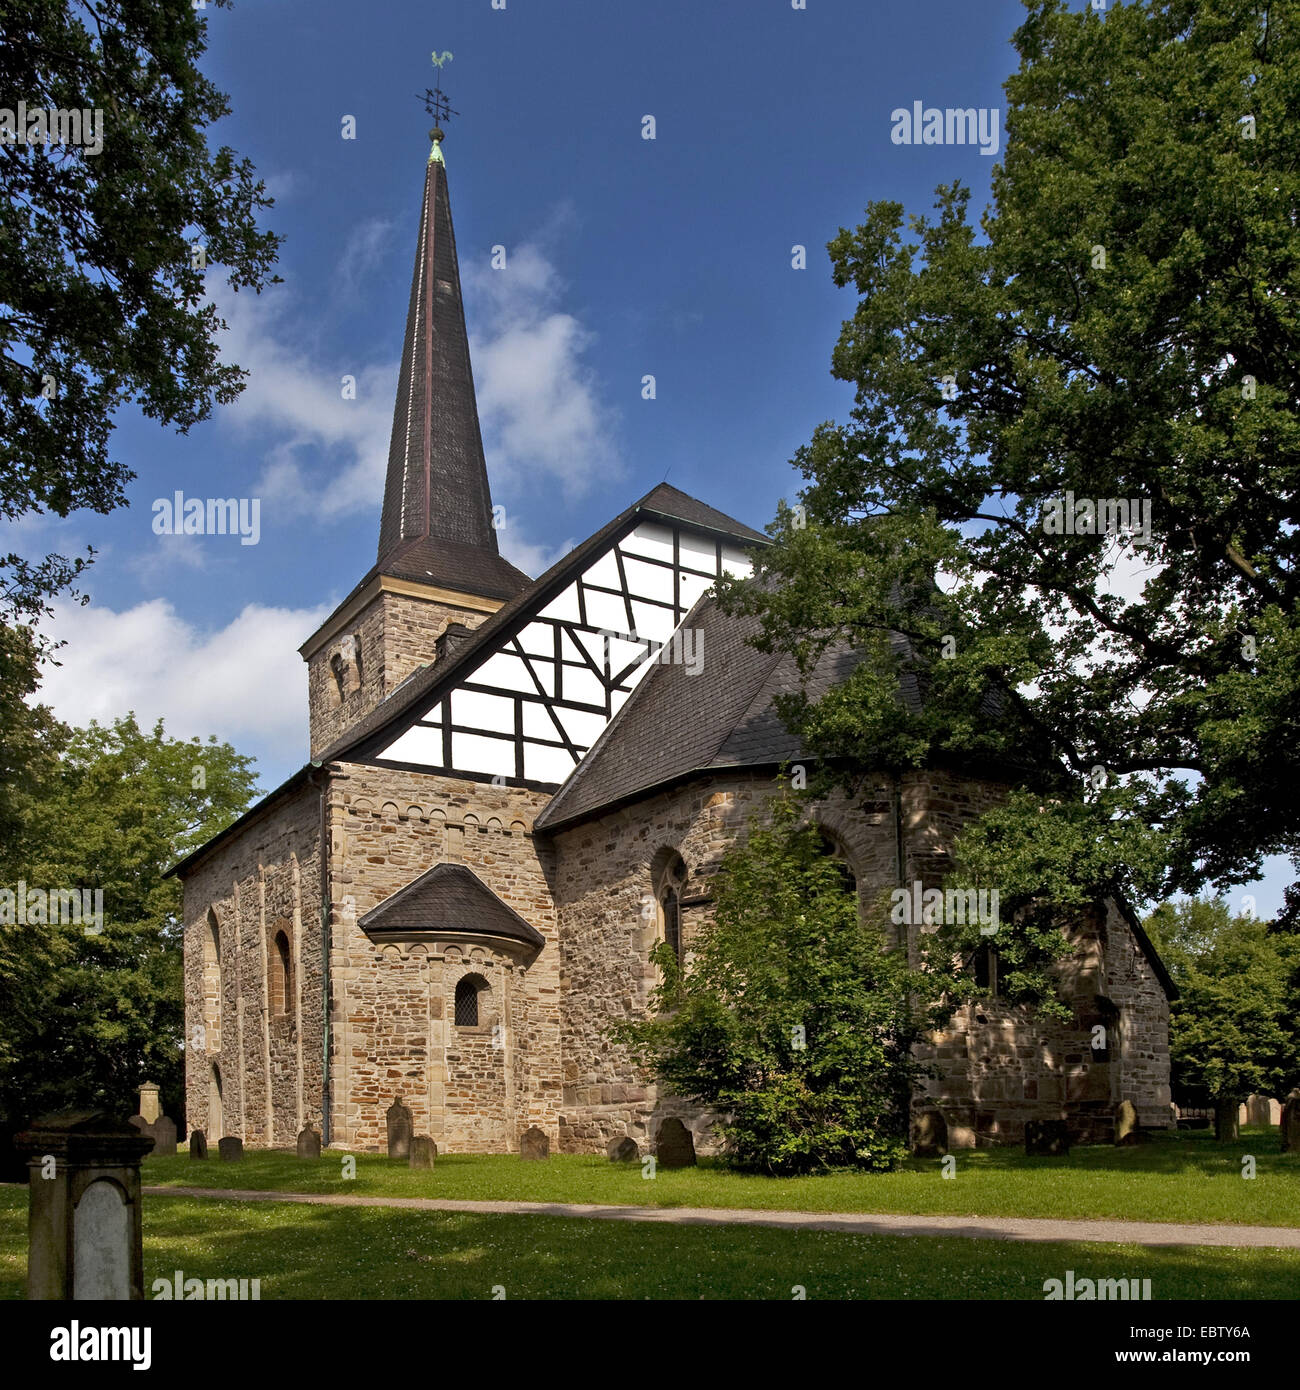 1000 years old church in Stiepel, Stiepeler Dorfkirche, with graves in the foreground, Germany, North Rhine-Westphalia, Ruhr Area, Bochum Stock Photo